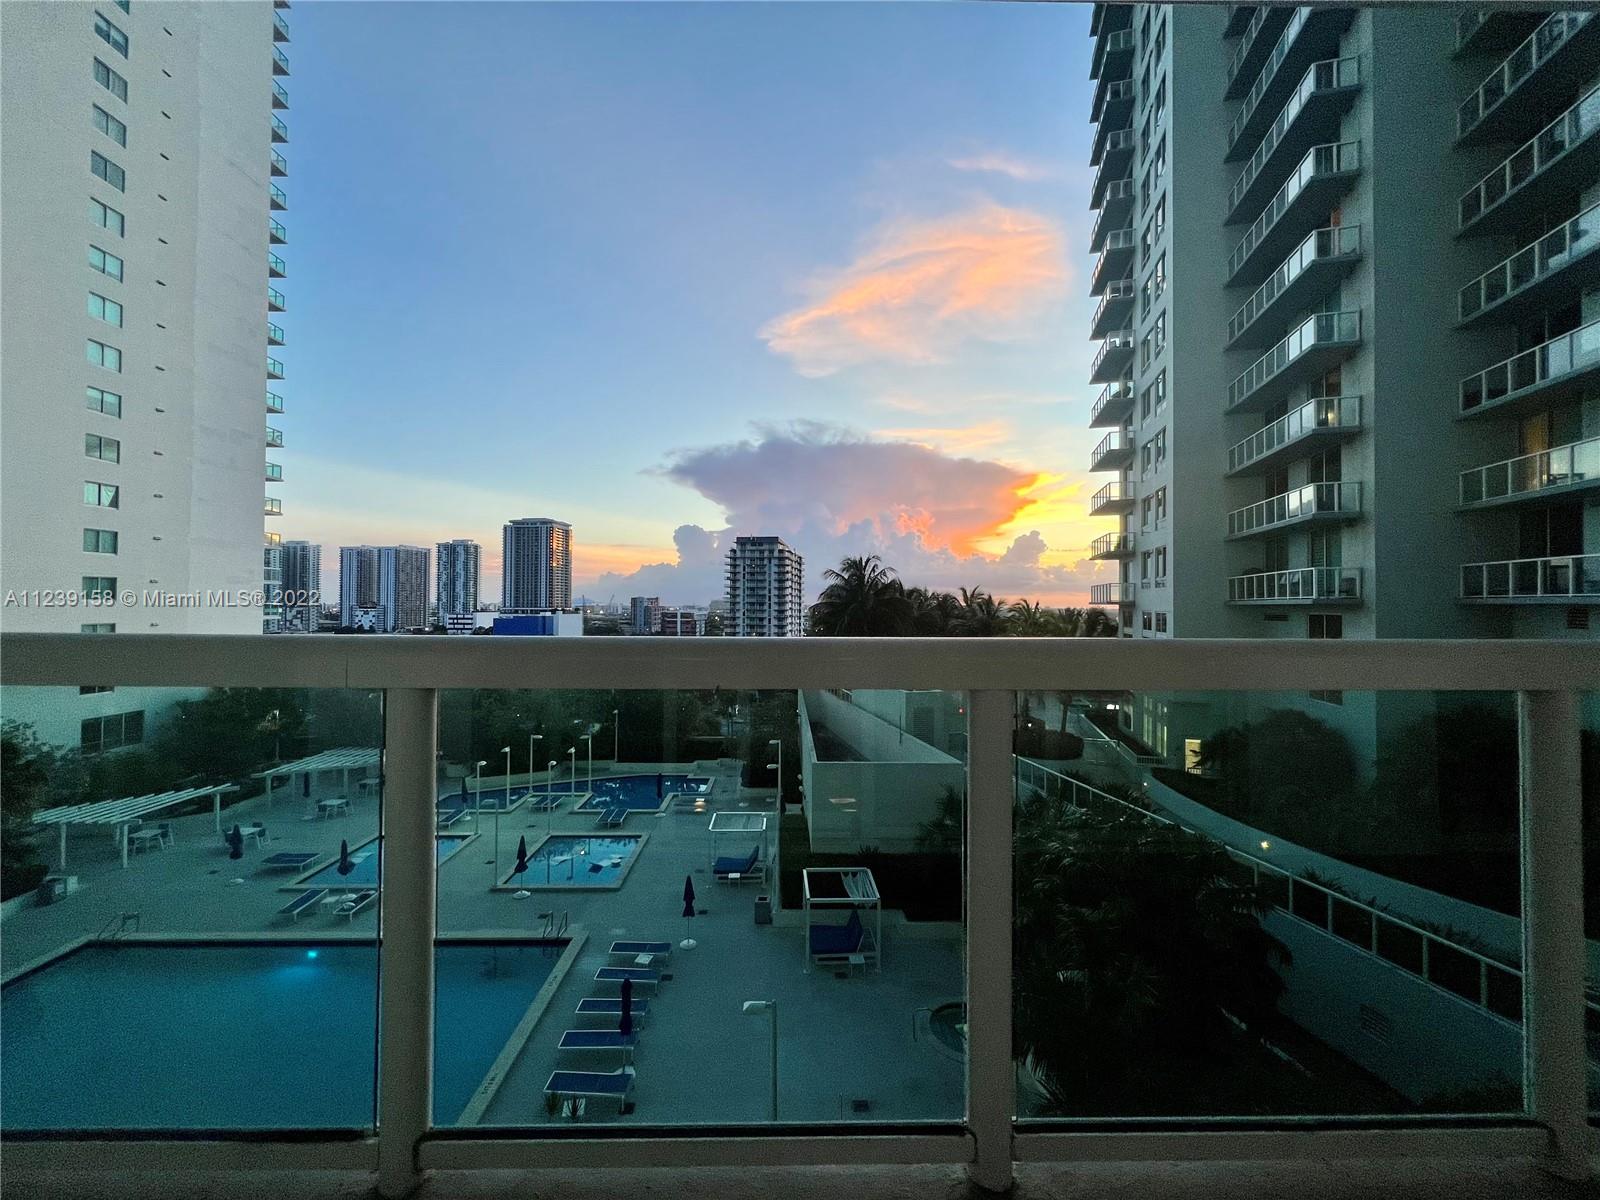 SPACIOUS 2 BEDROOMS 2 BATHS + DEN W/1310 SQFT OF AC SPACE + 192 SQFT IN TERRACE IN THE LUXURY 1800 CLUB LOCATED IN EDGEWATER IN DOWNTOWN MIAMI ACROSS FROM MARGARET PACE PARK.BEAUTIFUL SUNSET/POOL VIEWS.CABLE, INTERNET & 1 PARKING INCLUDED IN RENT.FULL AMENITIES BUILDING.WALK TO PARK, CAFES, NIGHTLIFE, PUBLIX, BANKS & SO MUCH MORE.5 MINUTES TO ALL THAT IS HAPPENING IN NEW URBAN MIAMI INCLUDING SOUTH BEACH, DOWNTOWN, BRICKELL, AAA, PERFORMING ARTS CENTER, THE PORT AND HEALTH DISTRICT.EASY ACCESS TO ALL MAJOR HIGHWAYS. VERY EASY TO SHOW.